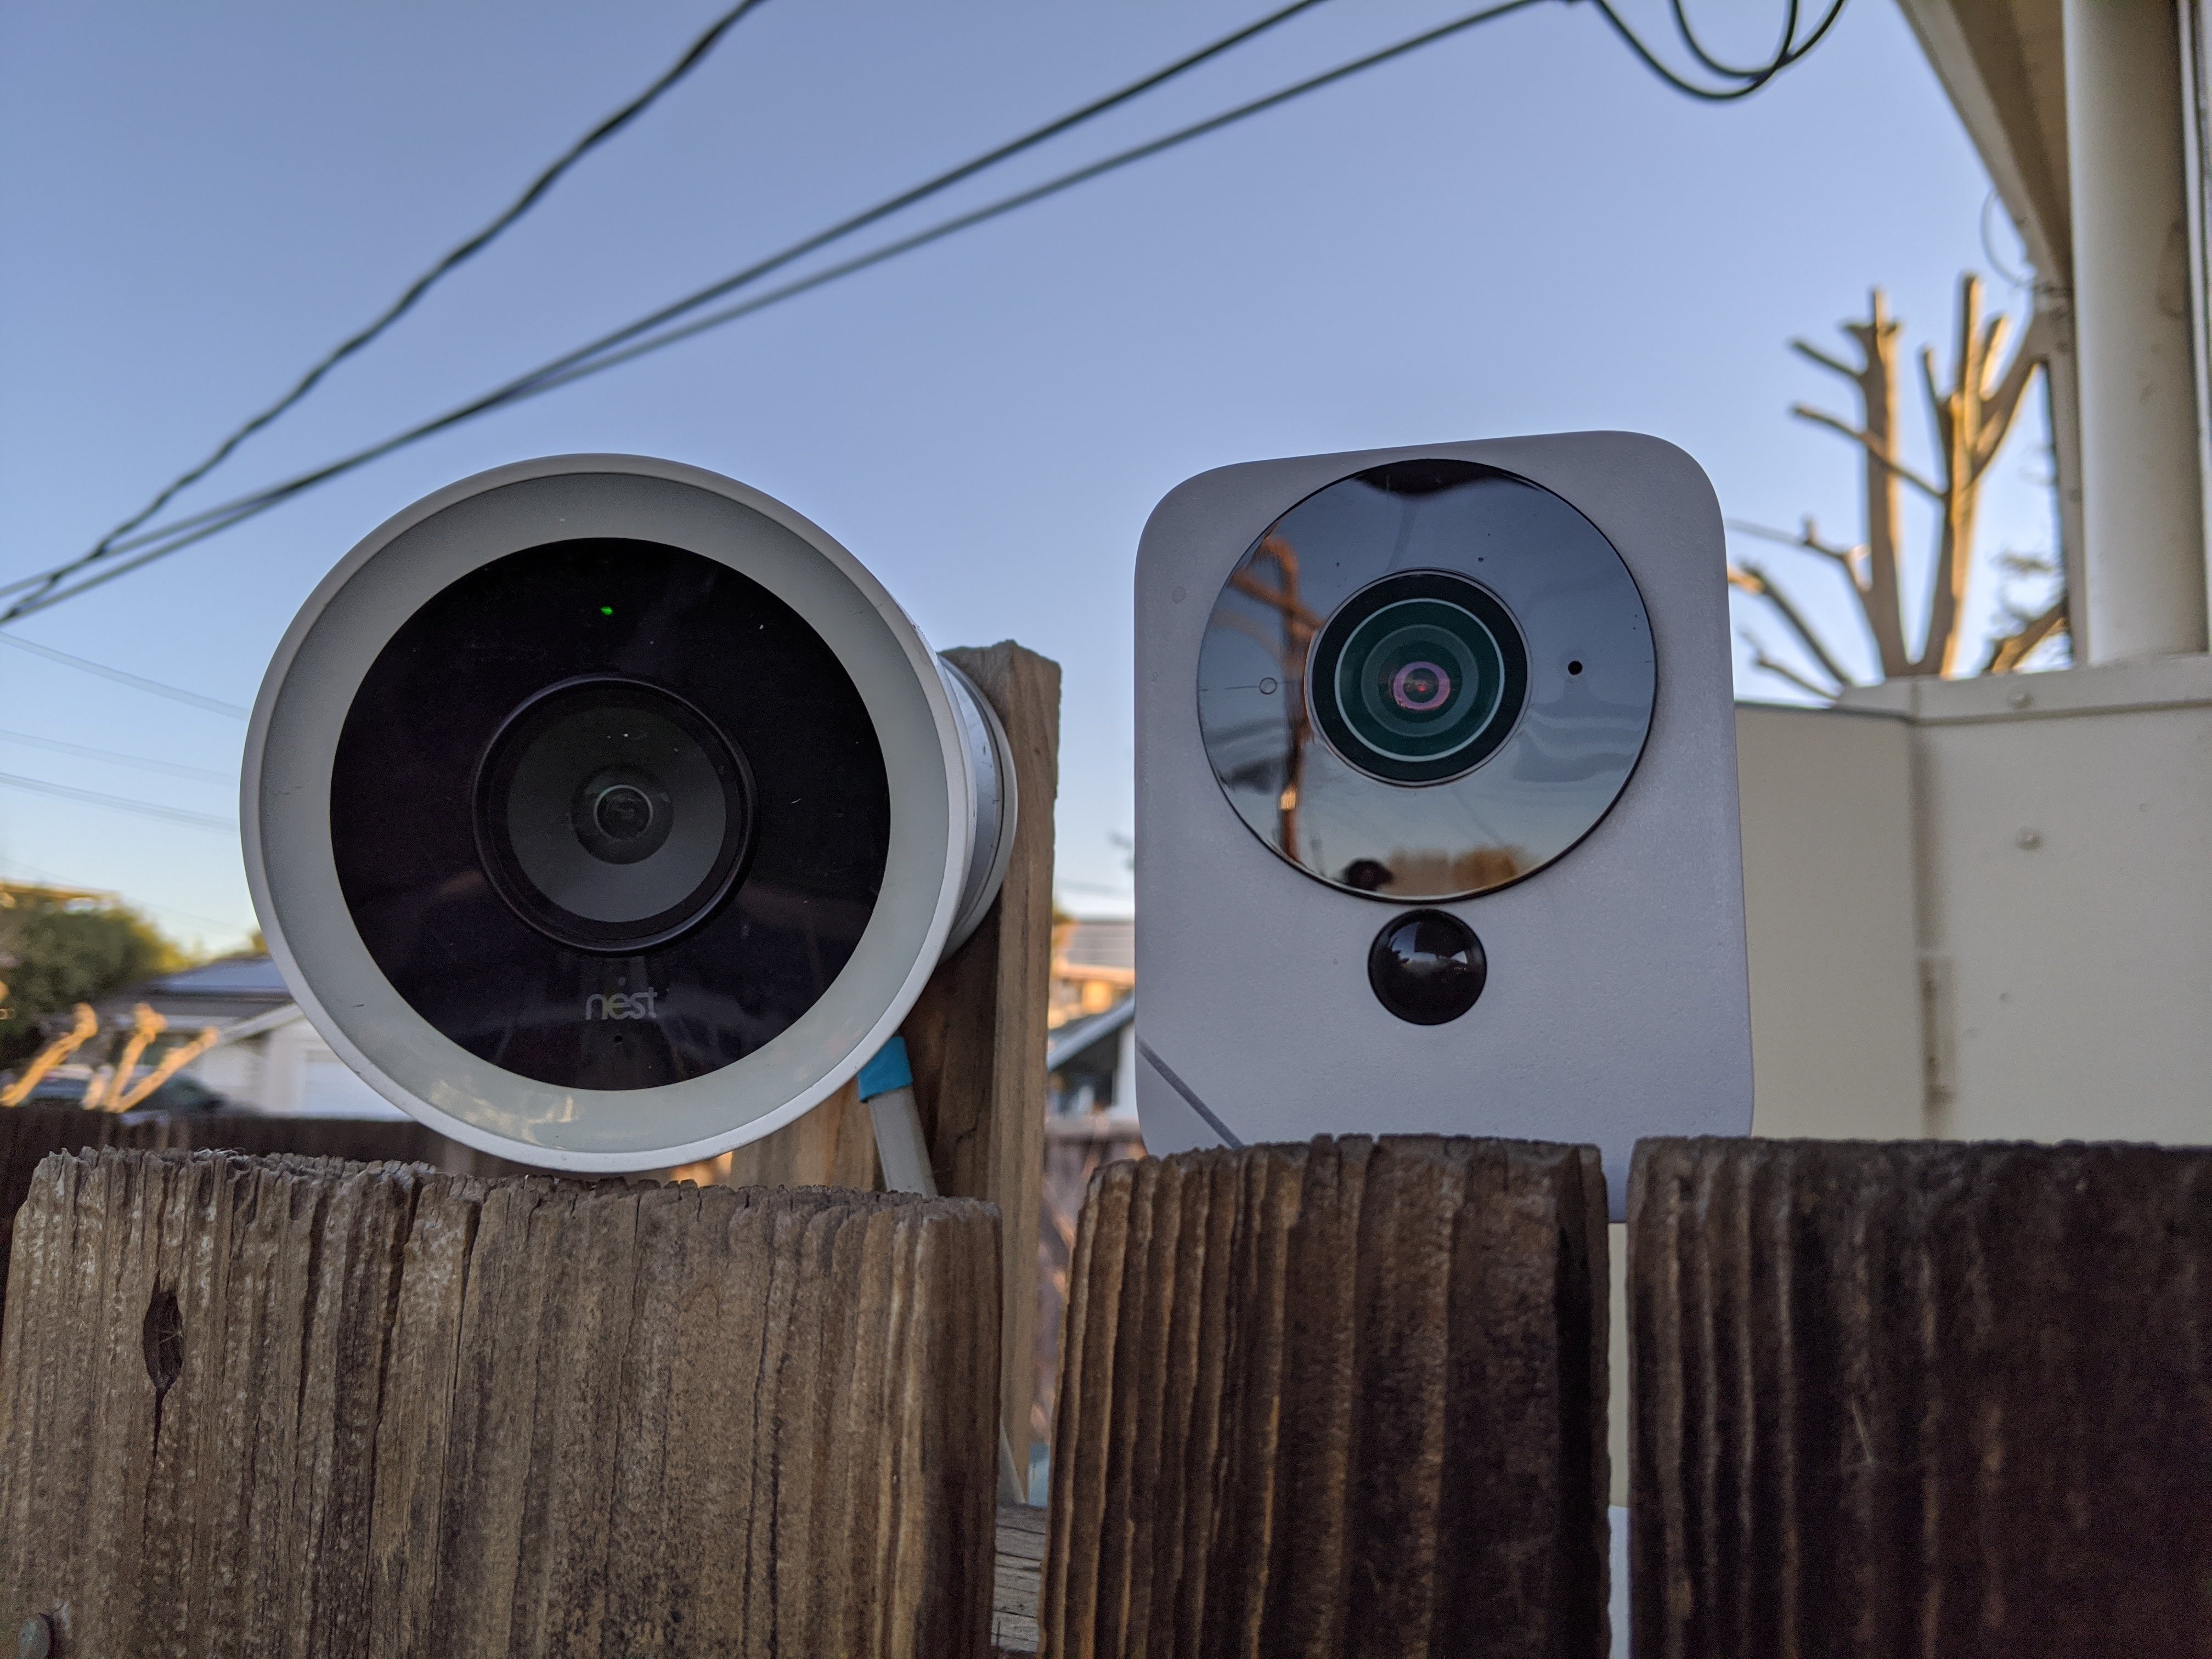 Can ADT access my camera?